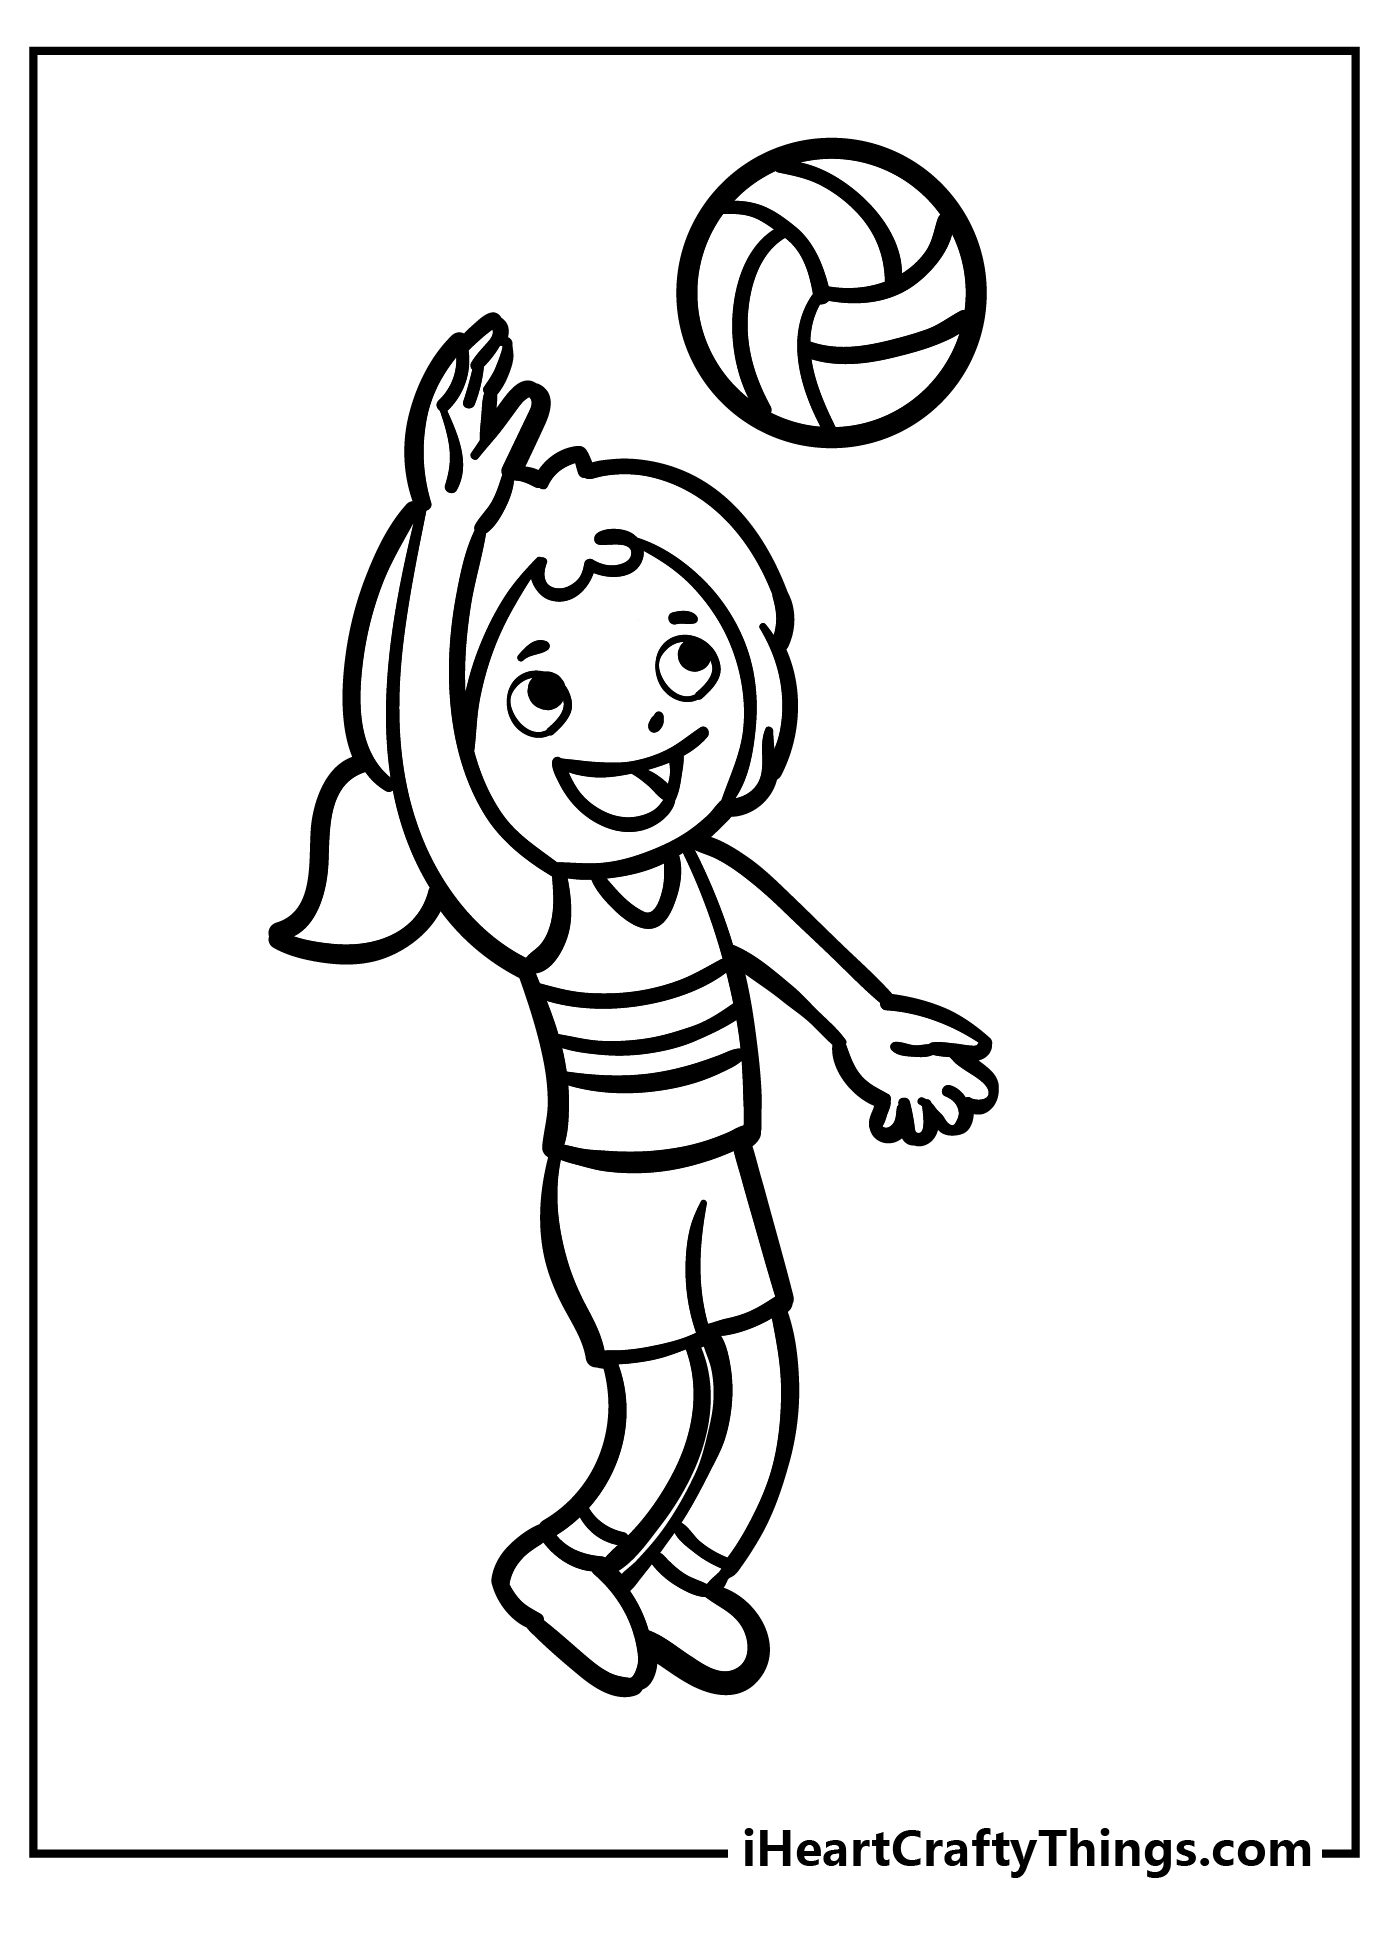 Volleyball Coloring Sheet for children free download